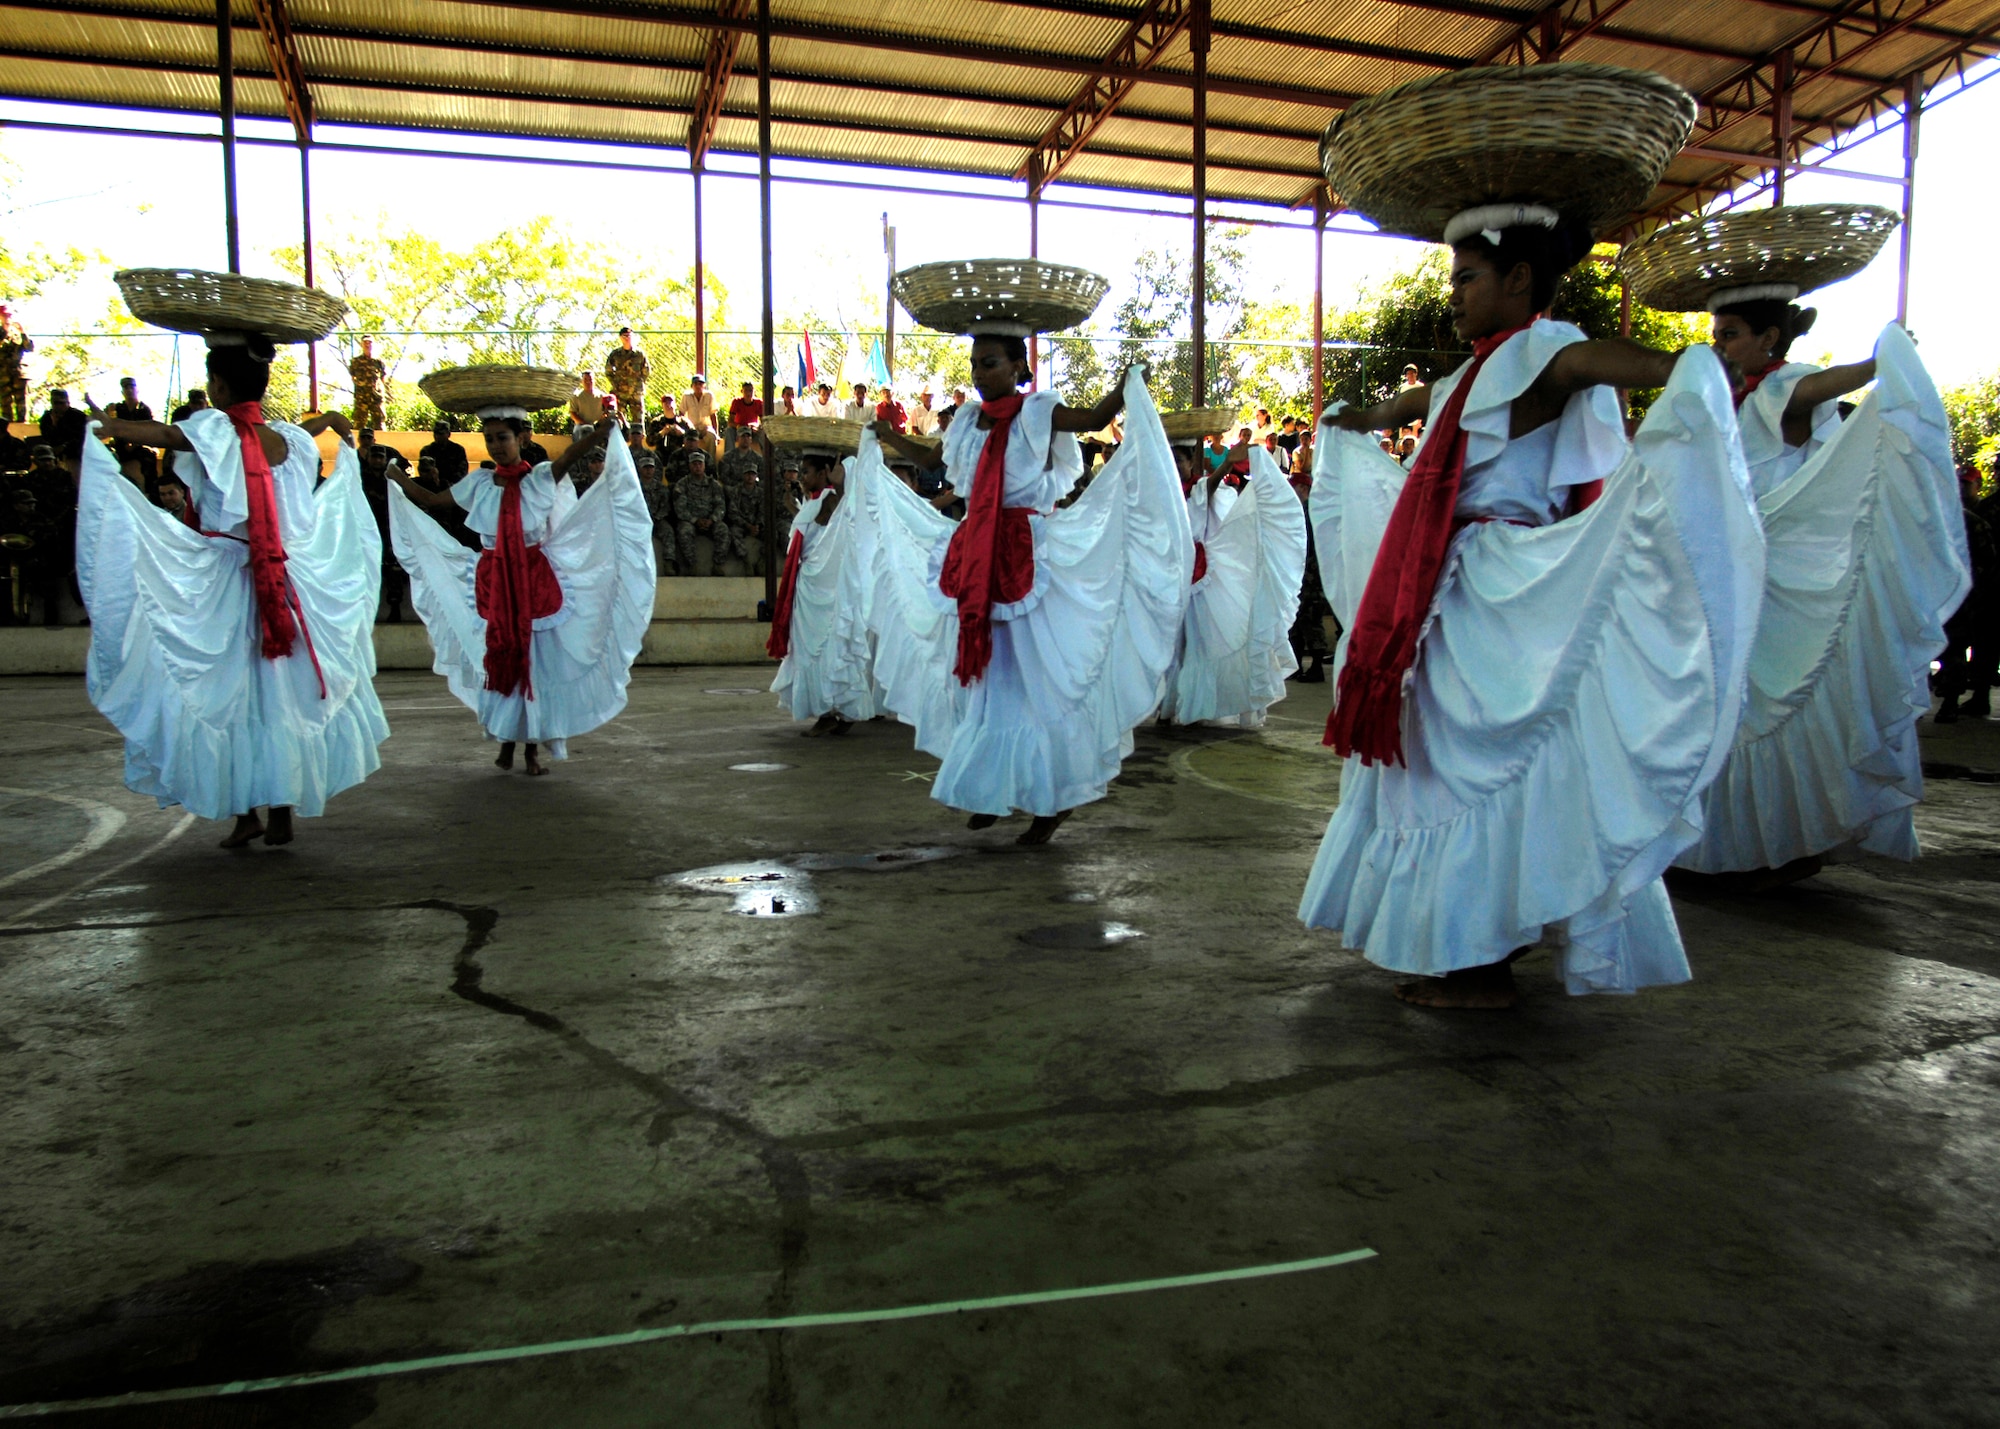 Students from the San Francisco School Dance Group of Santa Teresa perform a traditional Nicaraguan dance during the opening ceremonies of New Horizons-Nicaragua 2007, Feb. 15. (U.S. Air Force photo/Tech. Sgt. Kevin P. Milliken)